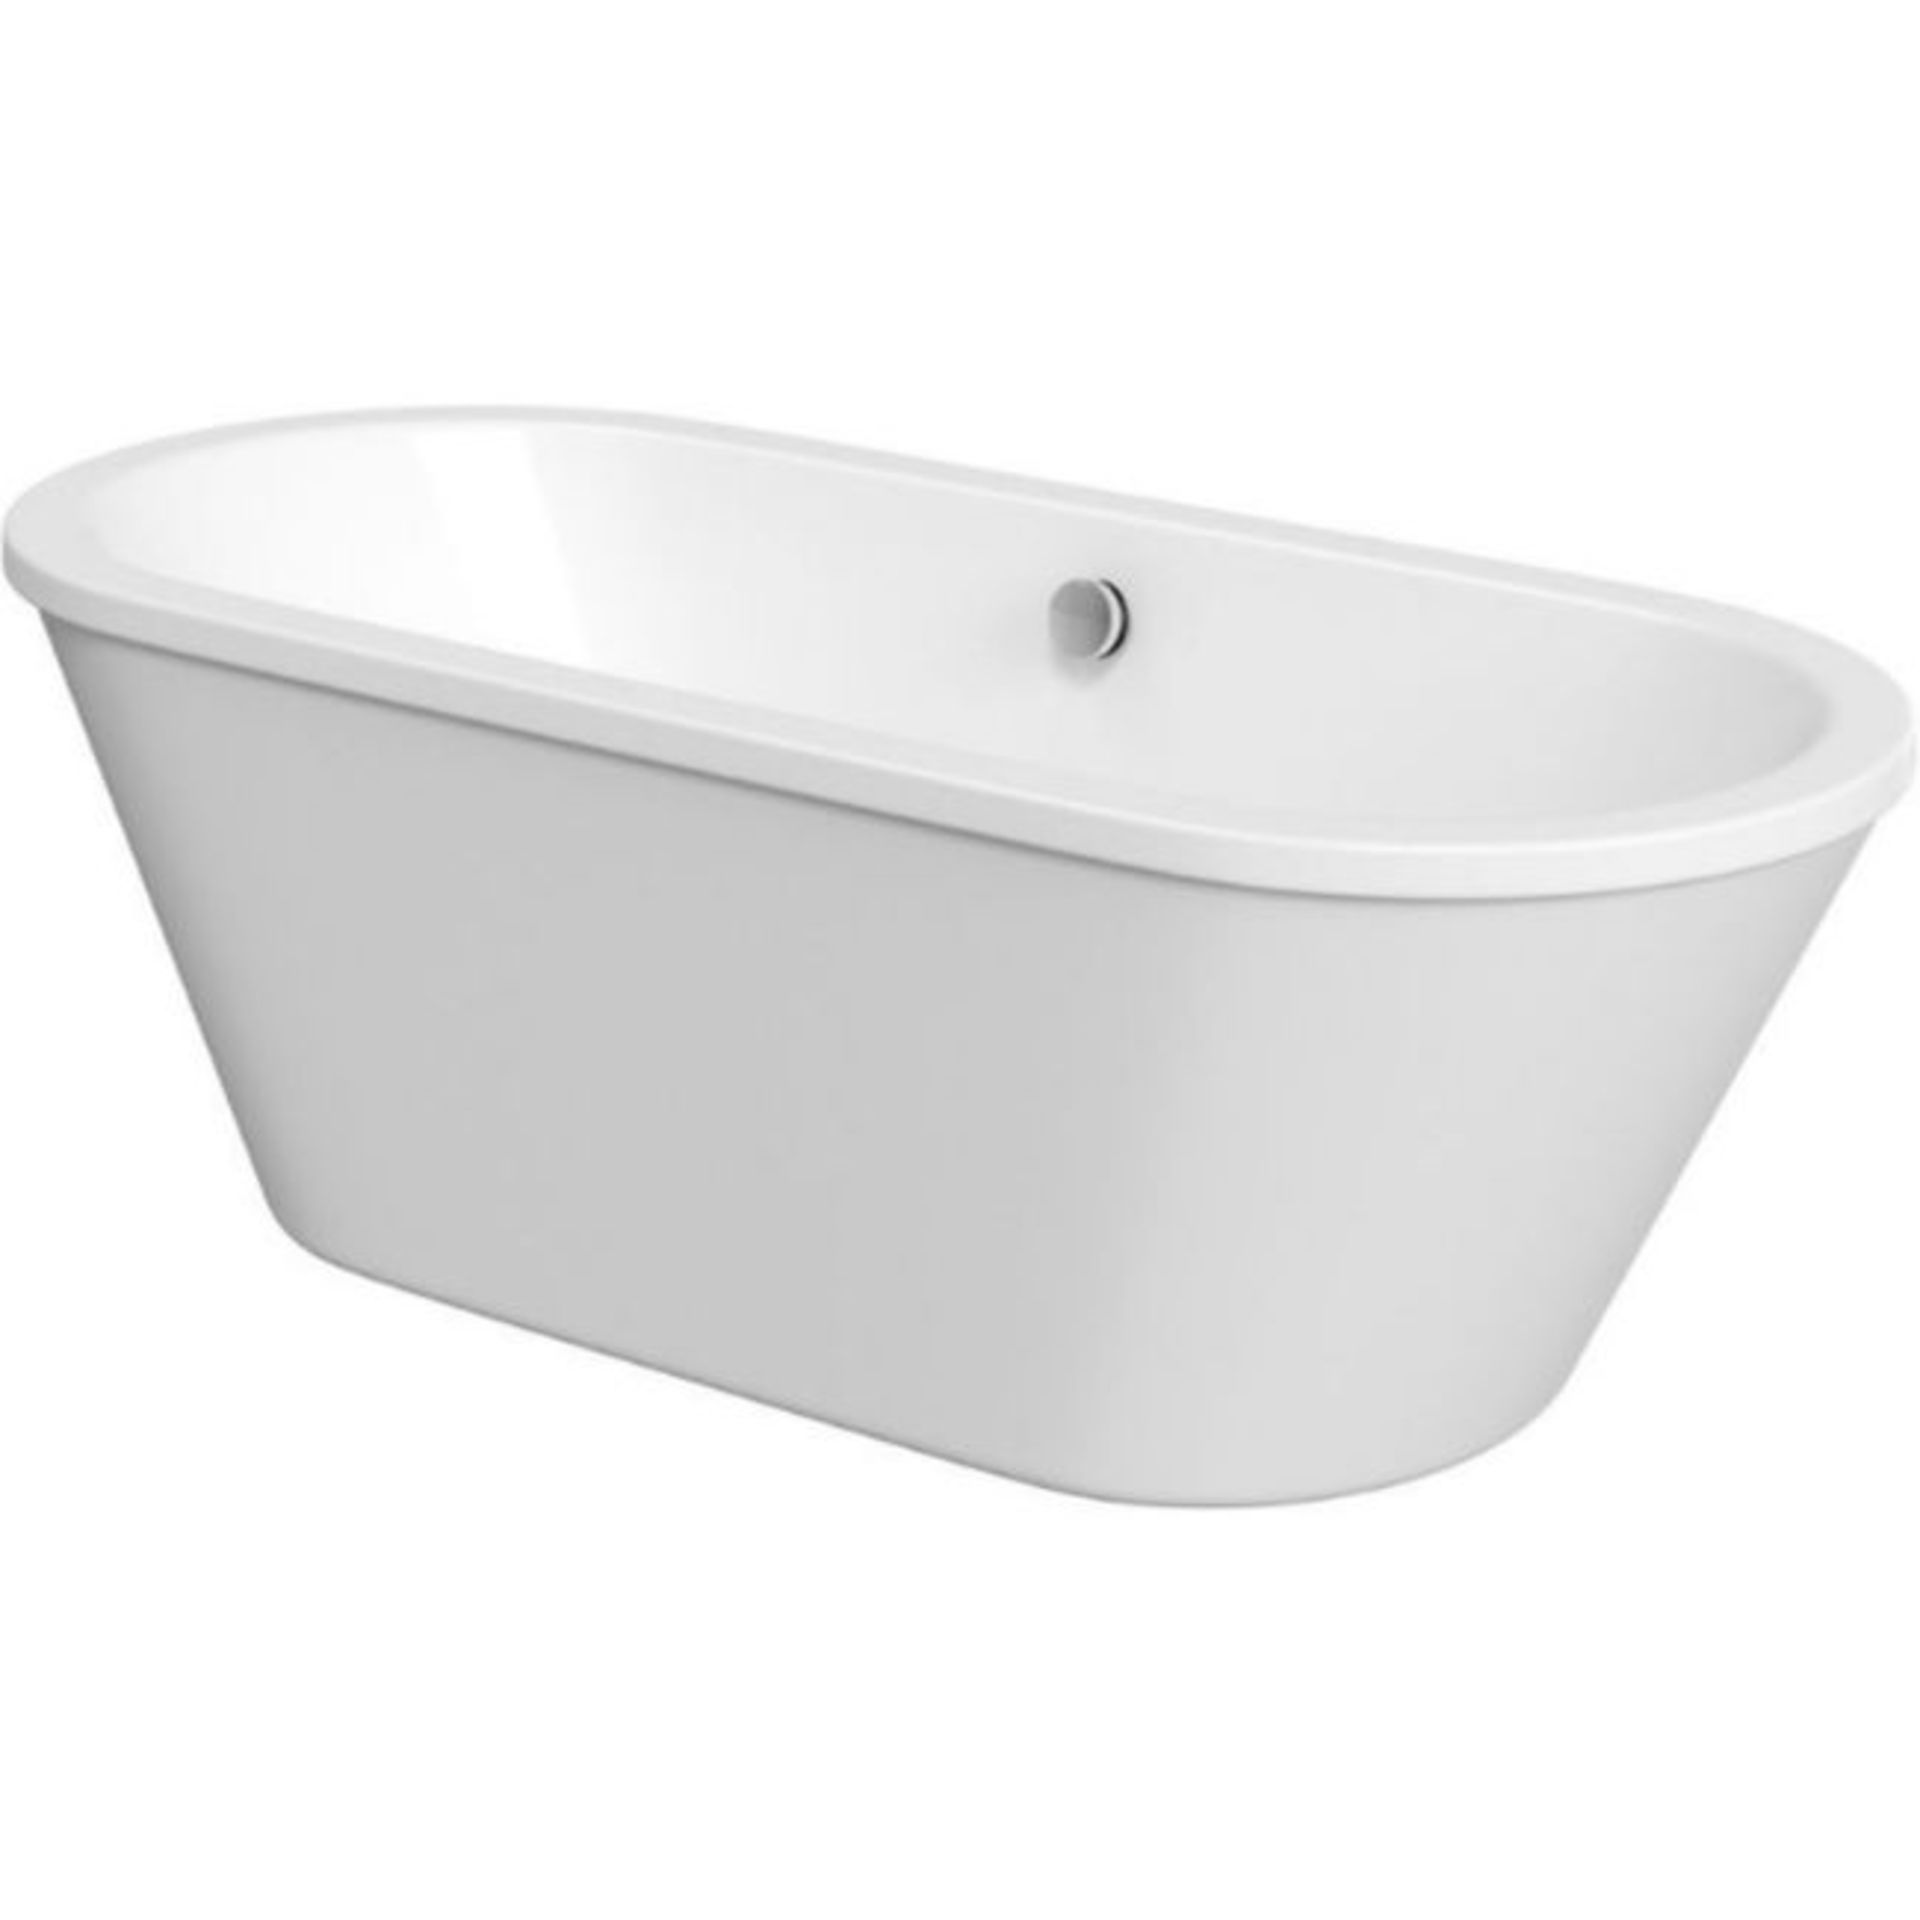 New (D3) Savoy 1700 mm x 755 mm Double Ended White Freestanding Bath. RRP £2,499.The Savoy Do... - Image 2 of 2